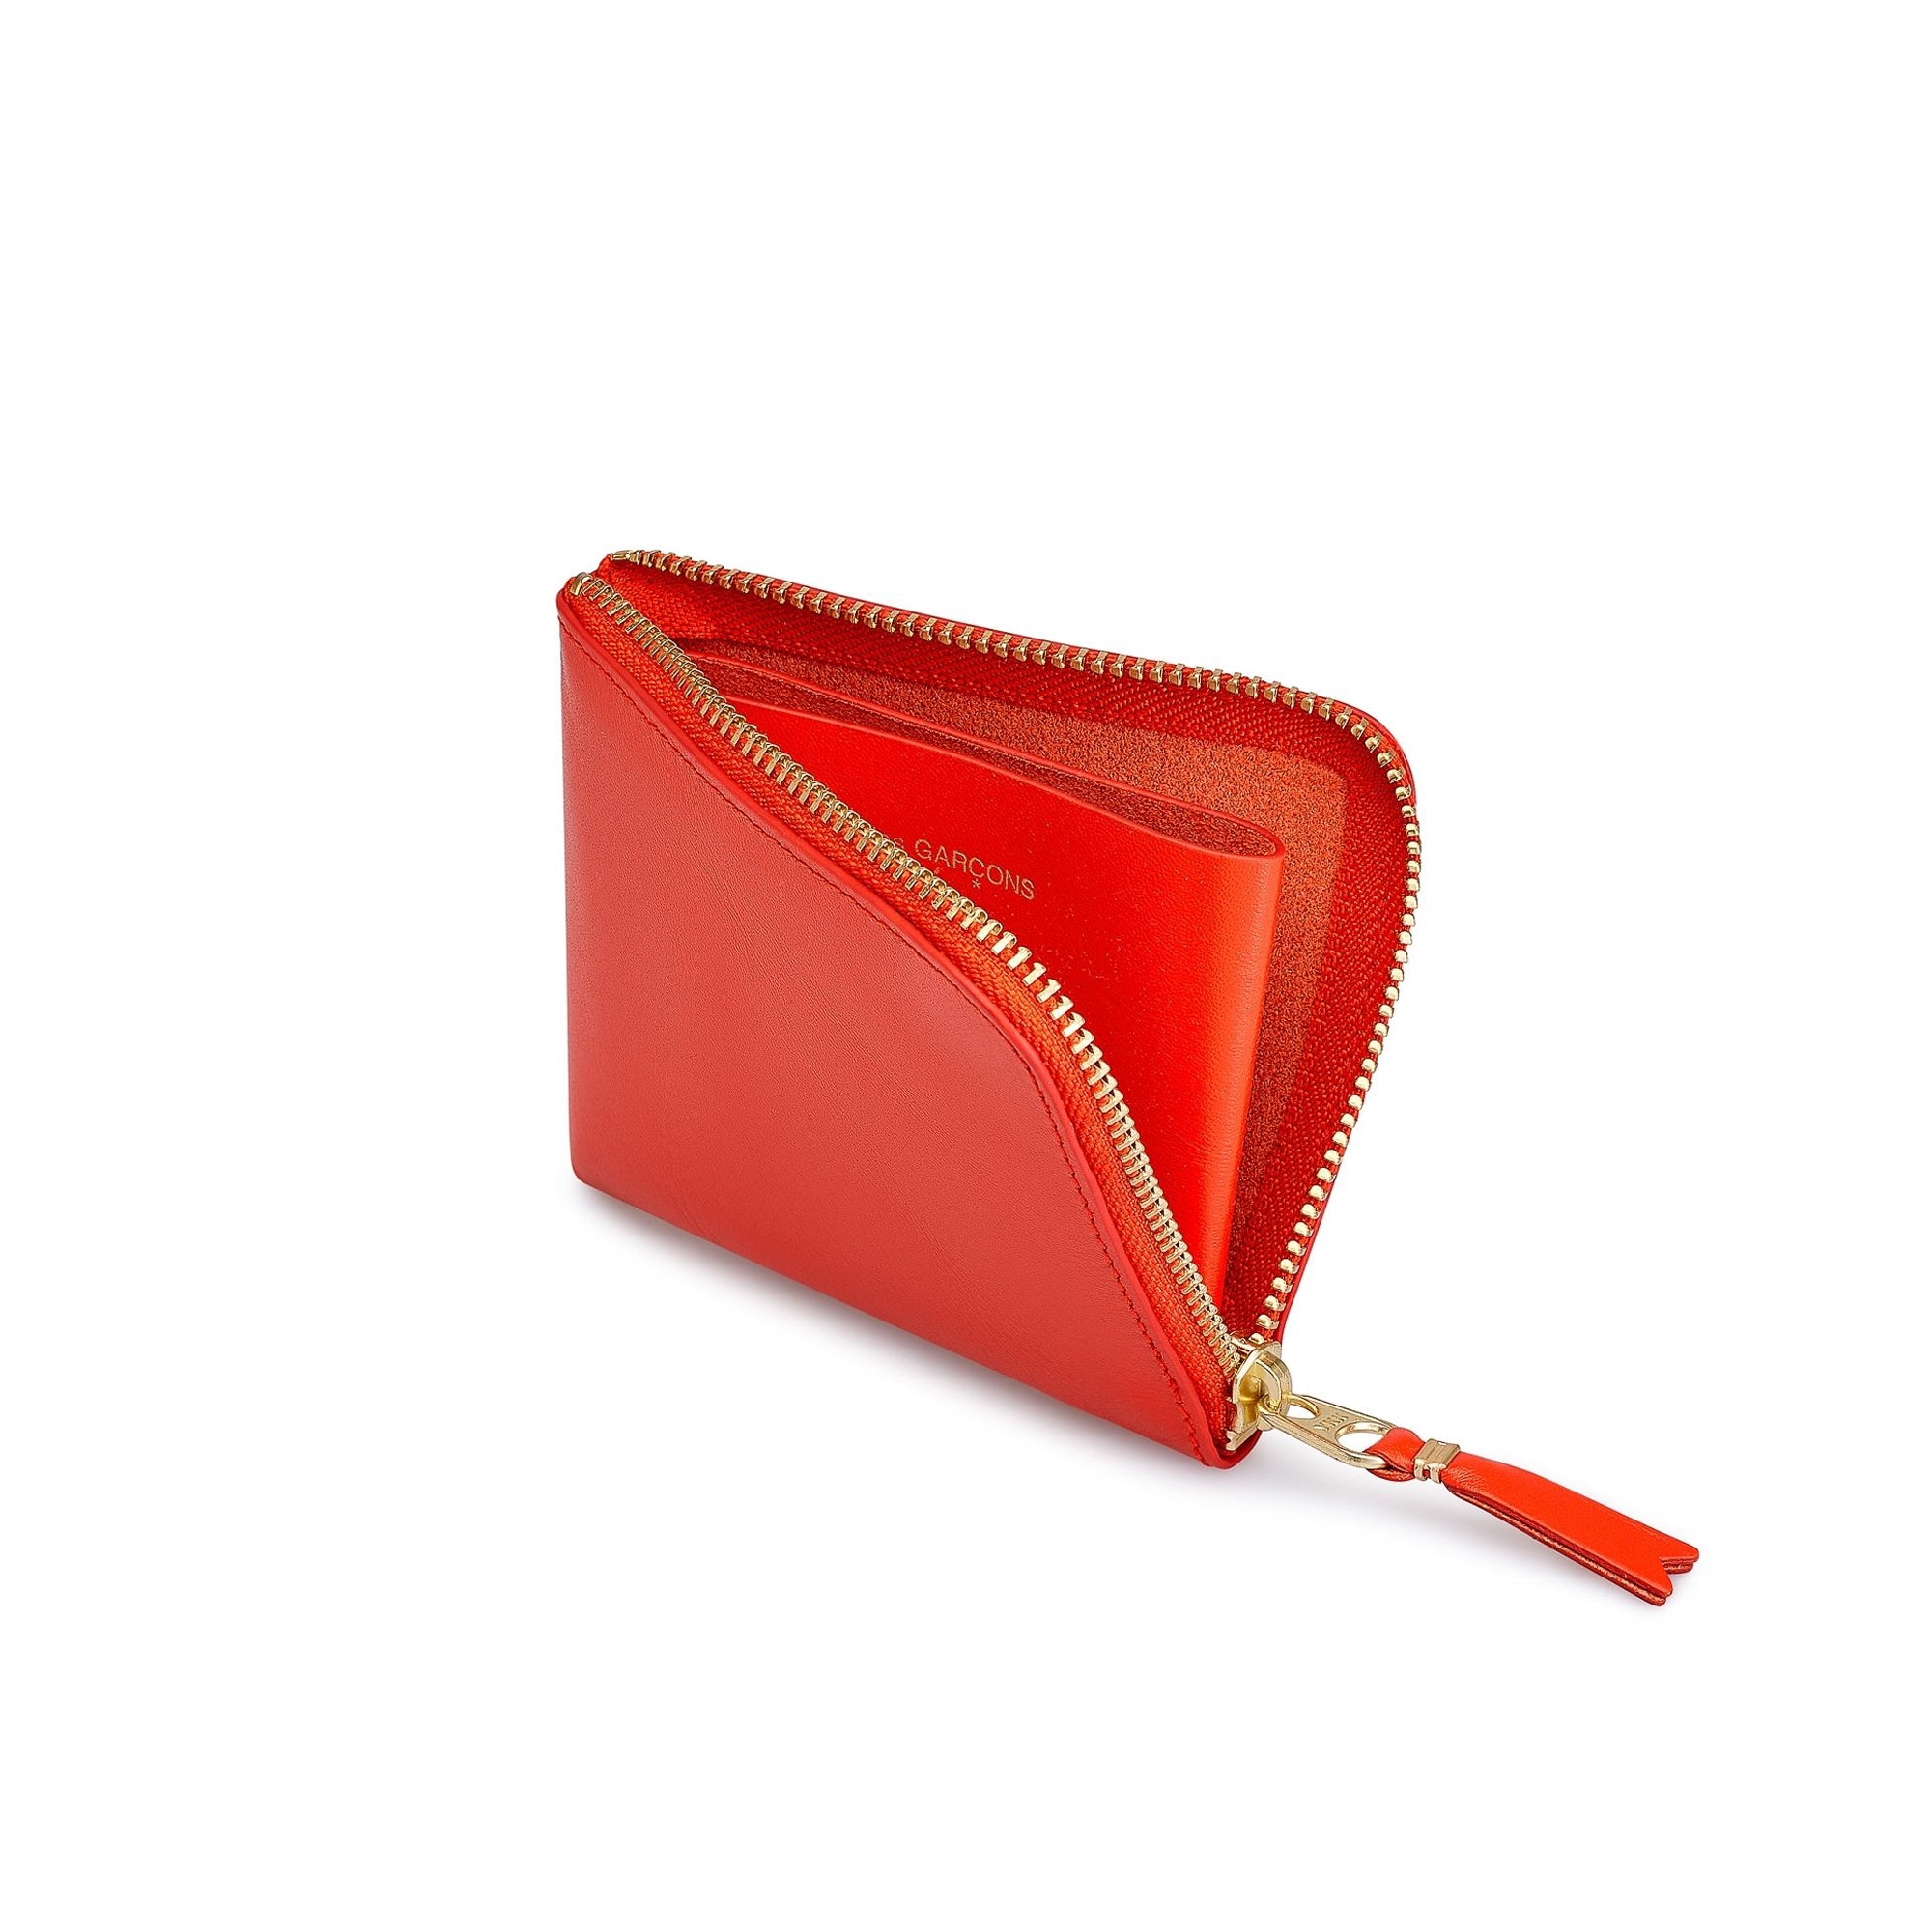 CDG WALLET - Colored Leather - (SA3100 Orange) view 2